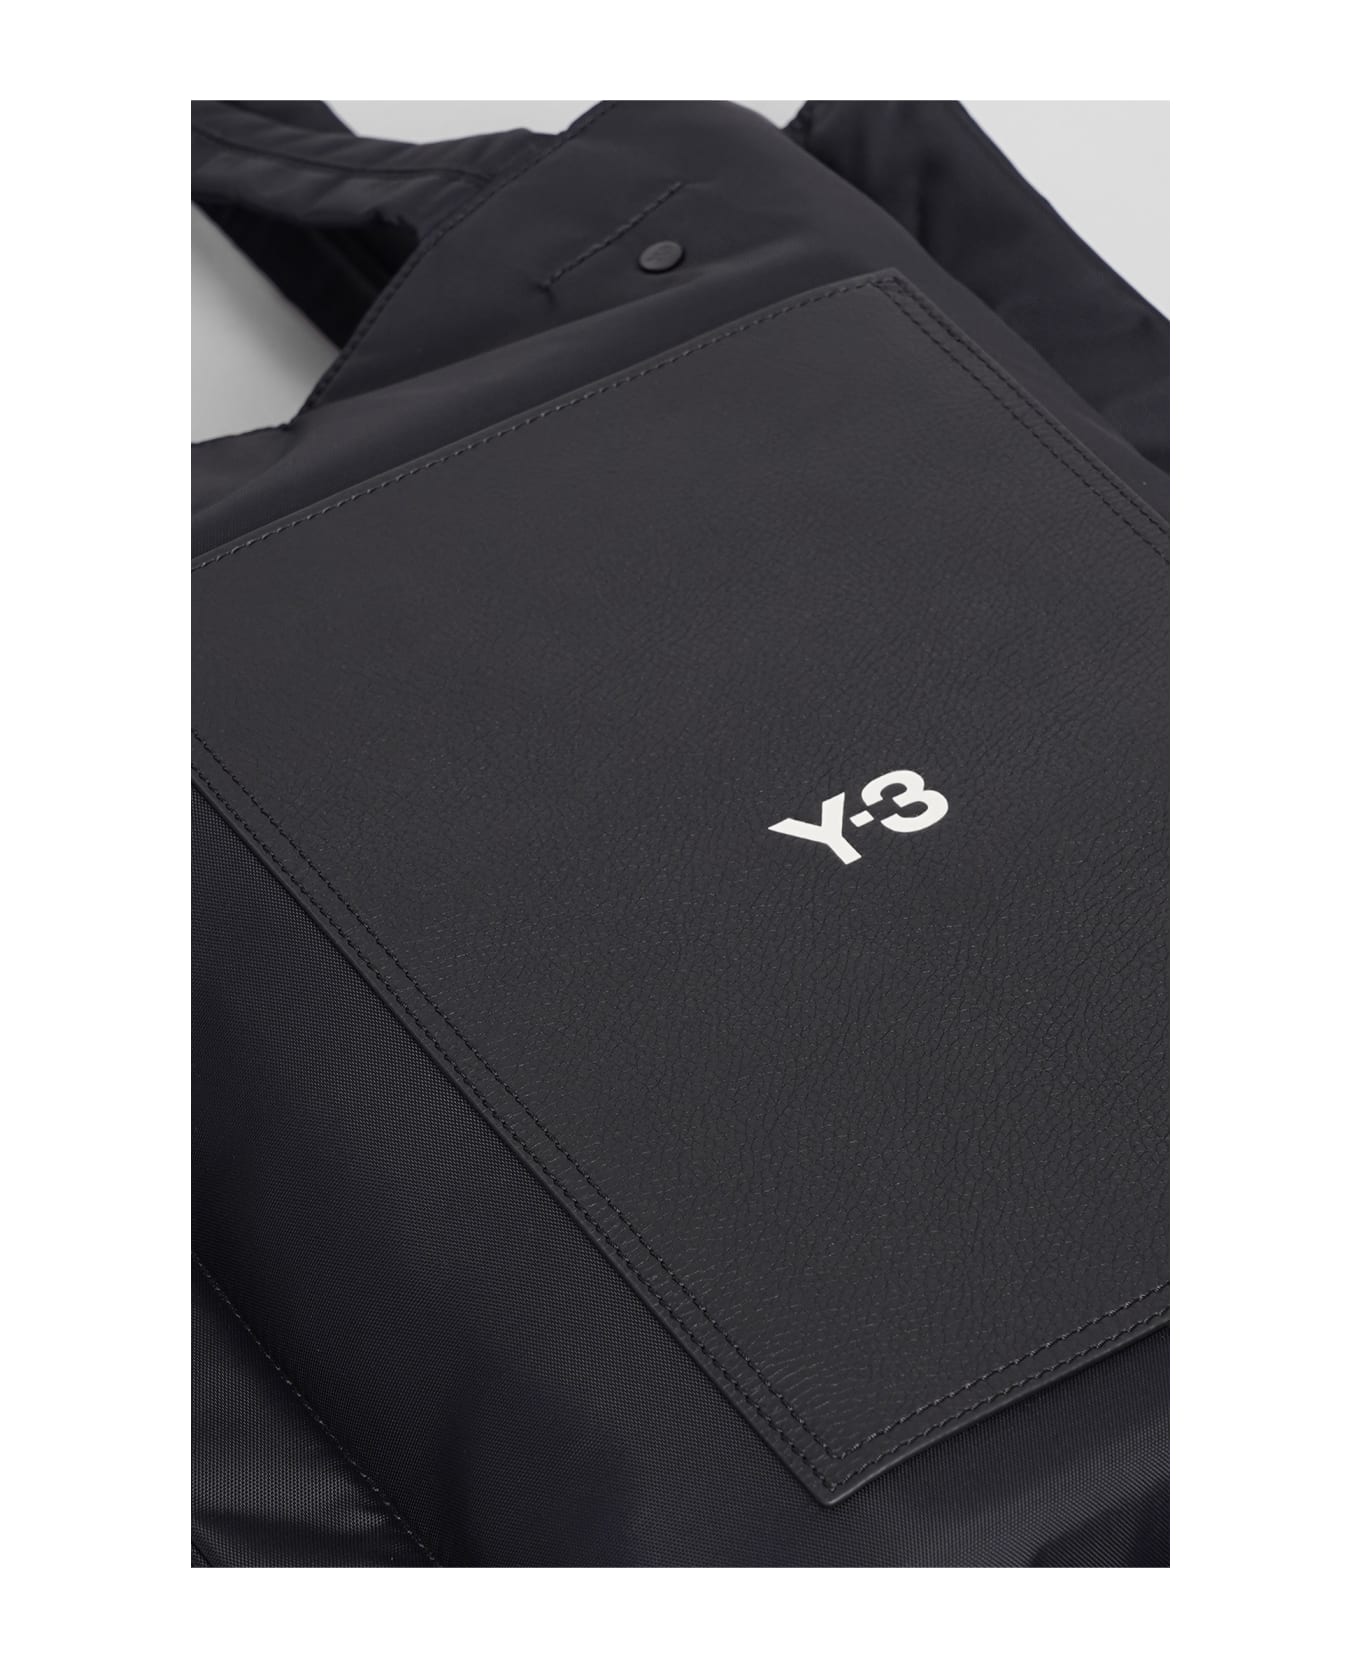 Y-3 Tote In Black Polyester トートバッグ